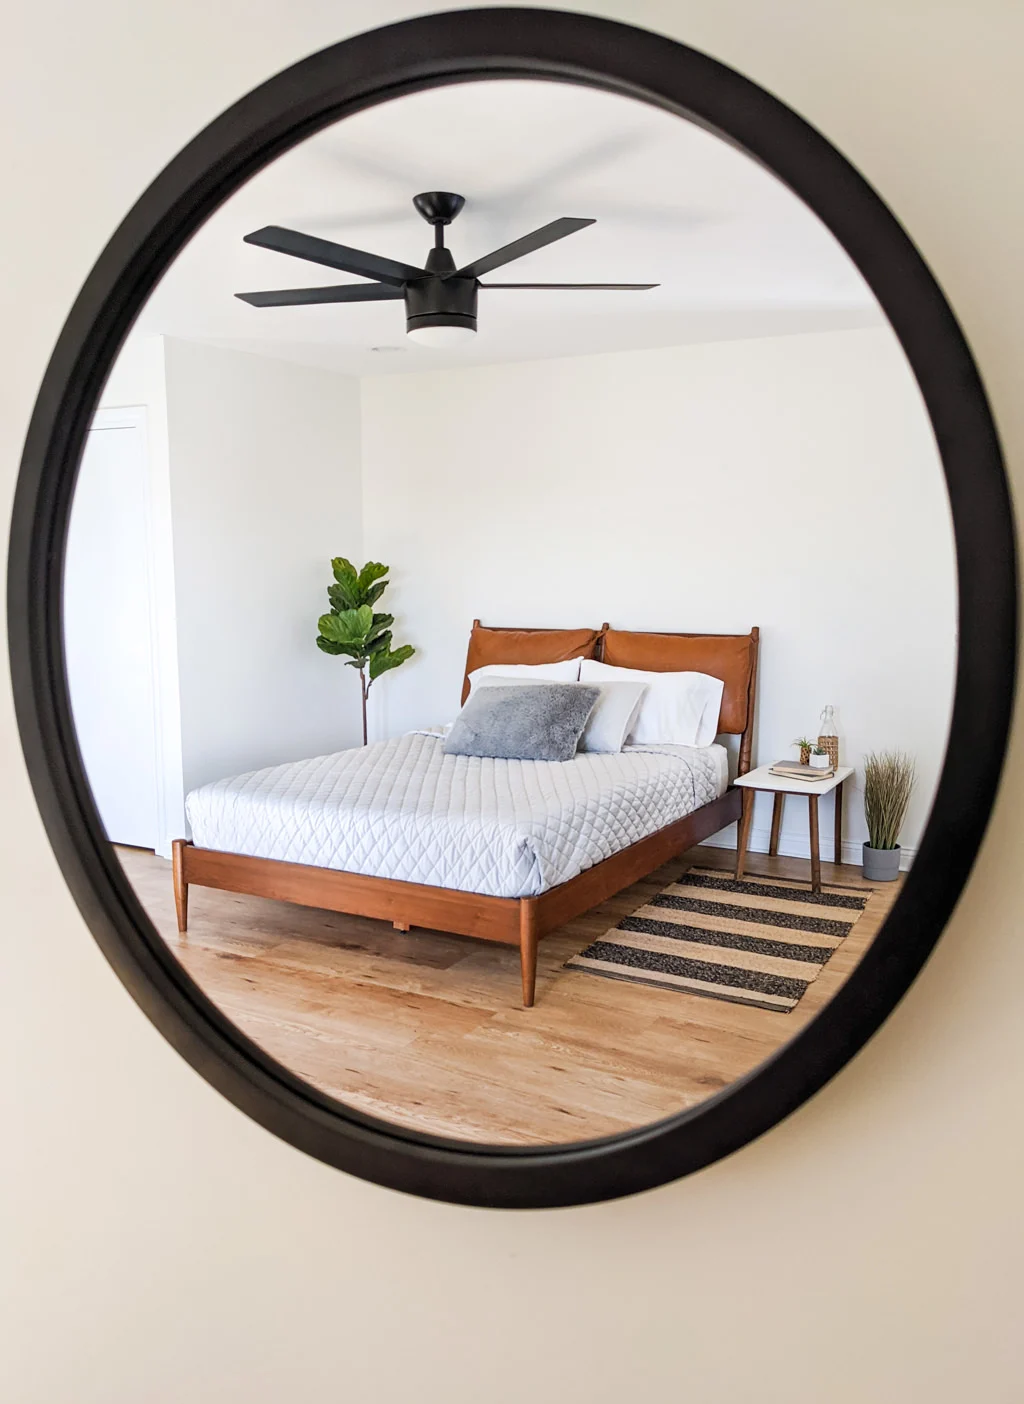 Round mirror reflection of a mid-century modern bedroom style